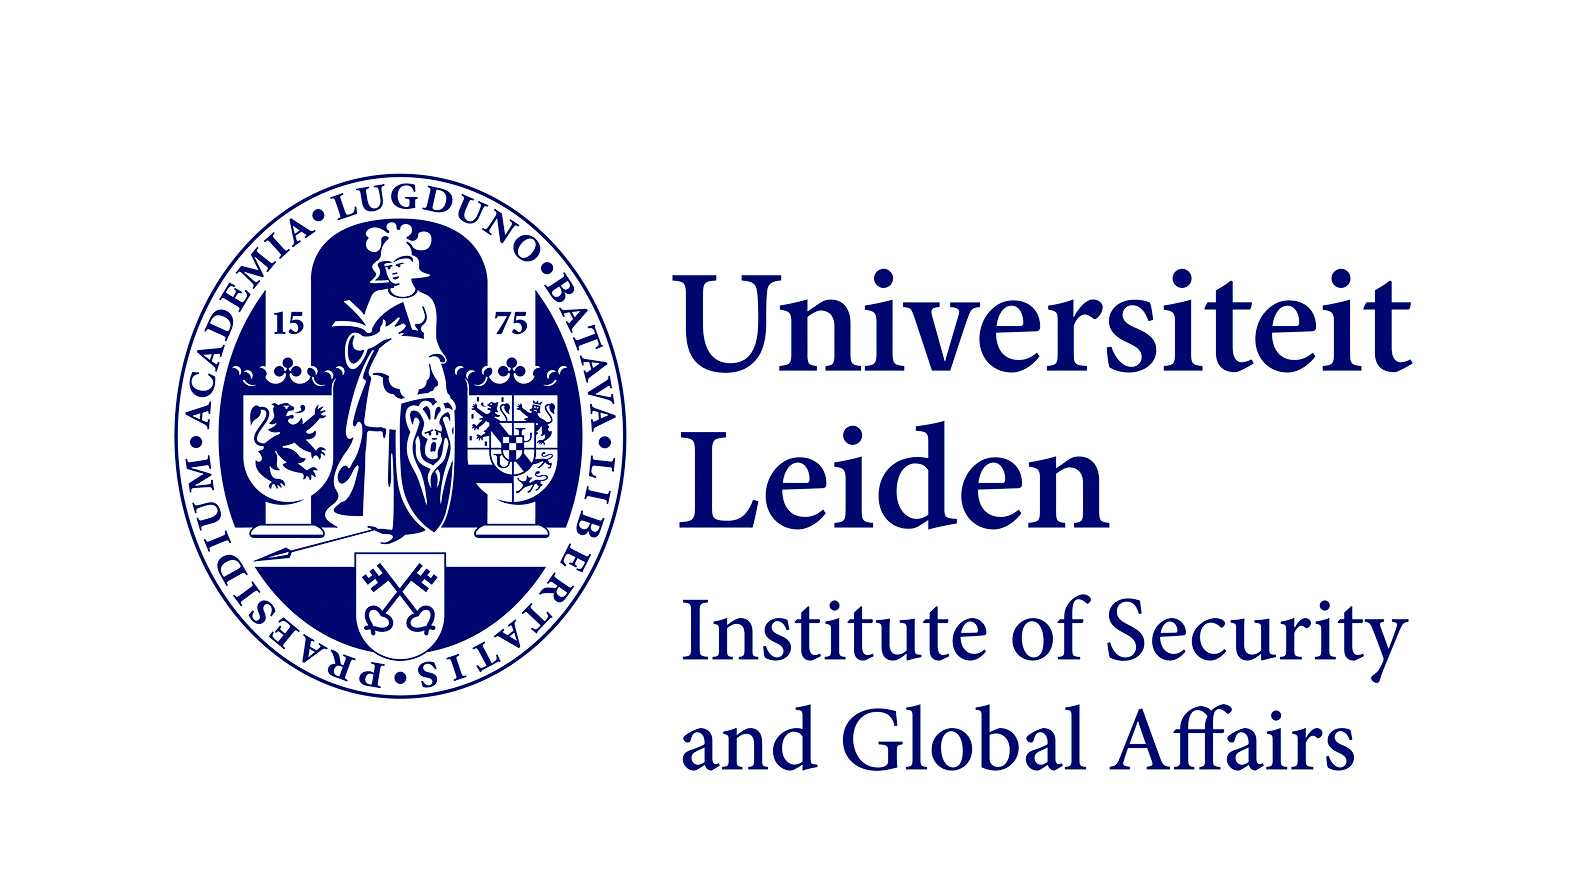 Institute of security and global affairs logo